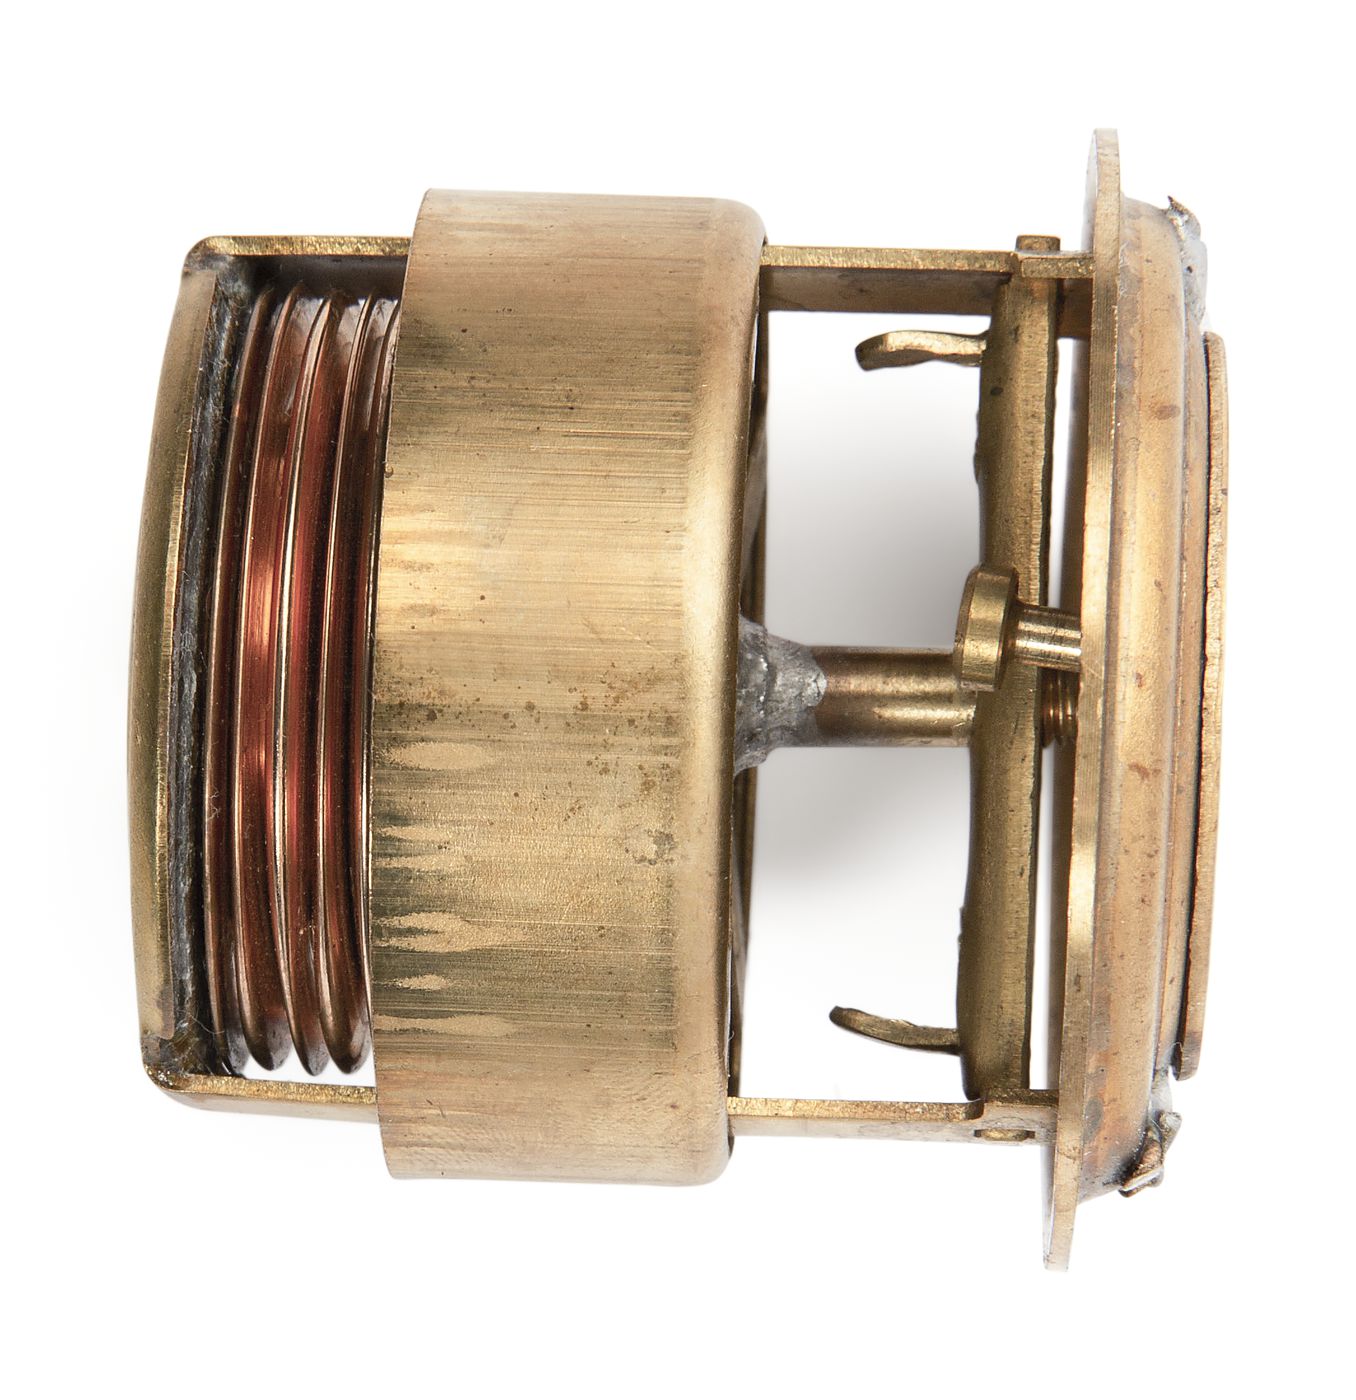 Thermostat
Thermostat
Thermostat
Thermostaat
Termostato
Thermost